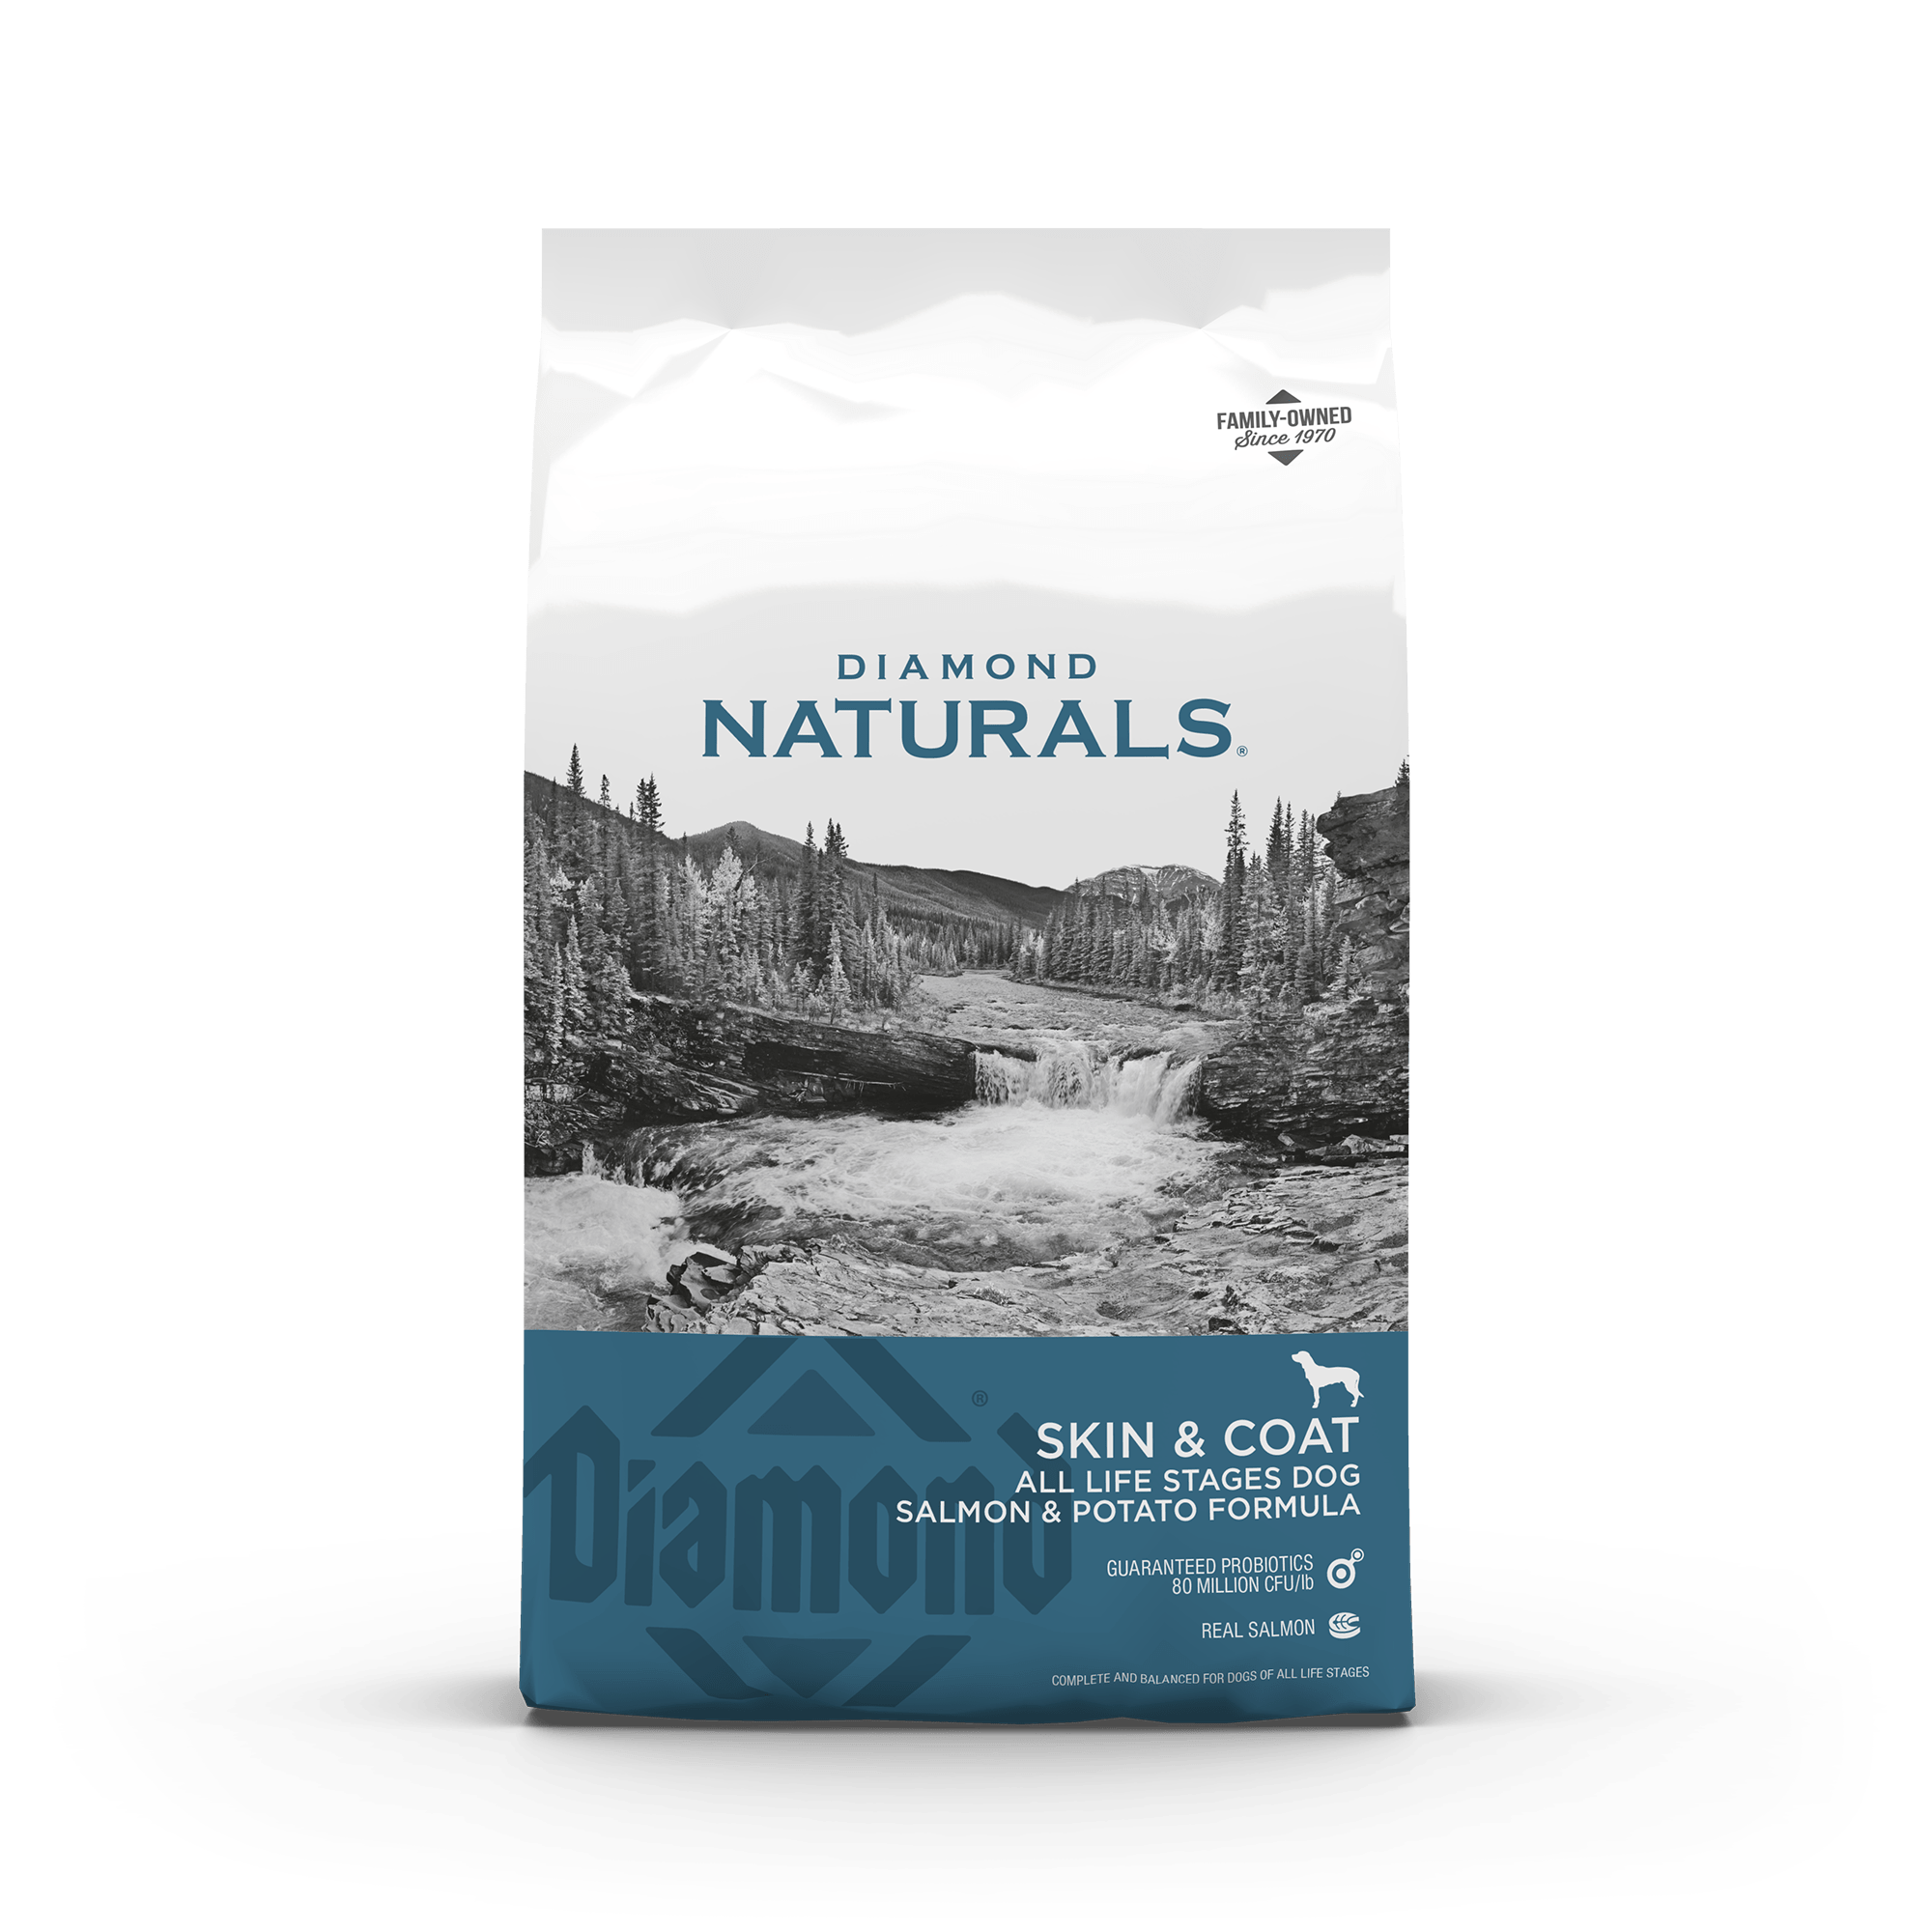 Diamond Naturals Skin & Coat All Life Stages Dog Salmon & Potato Formula product packaging